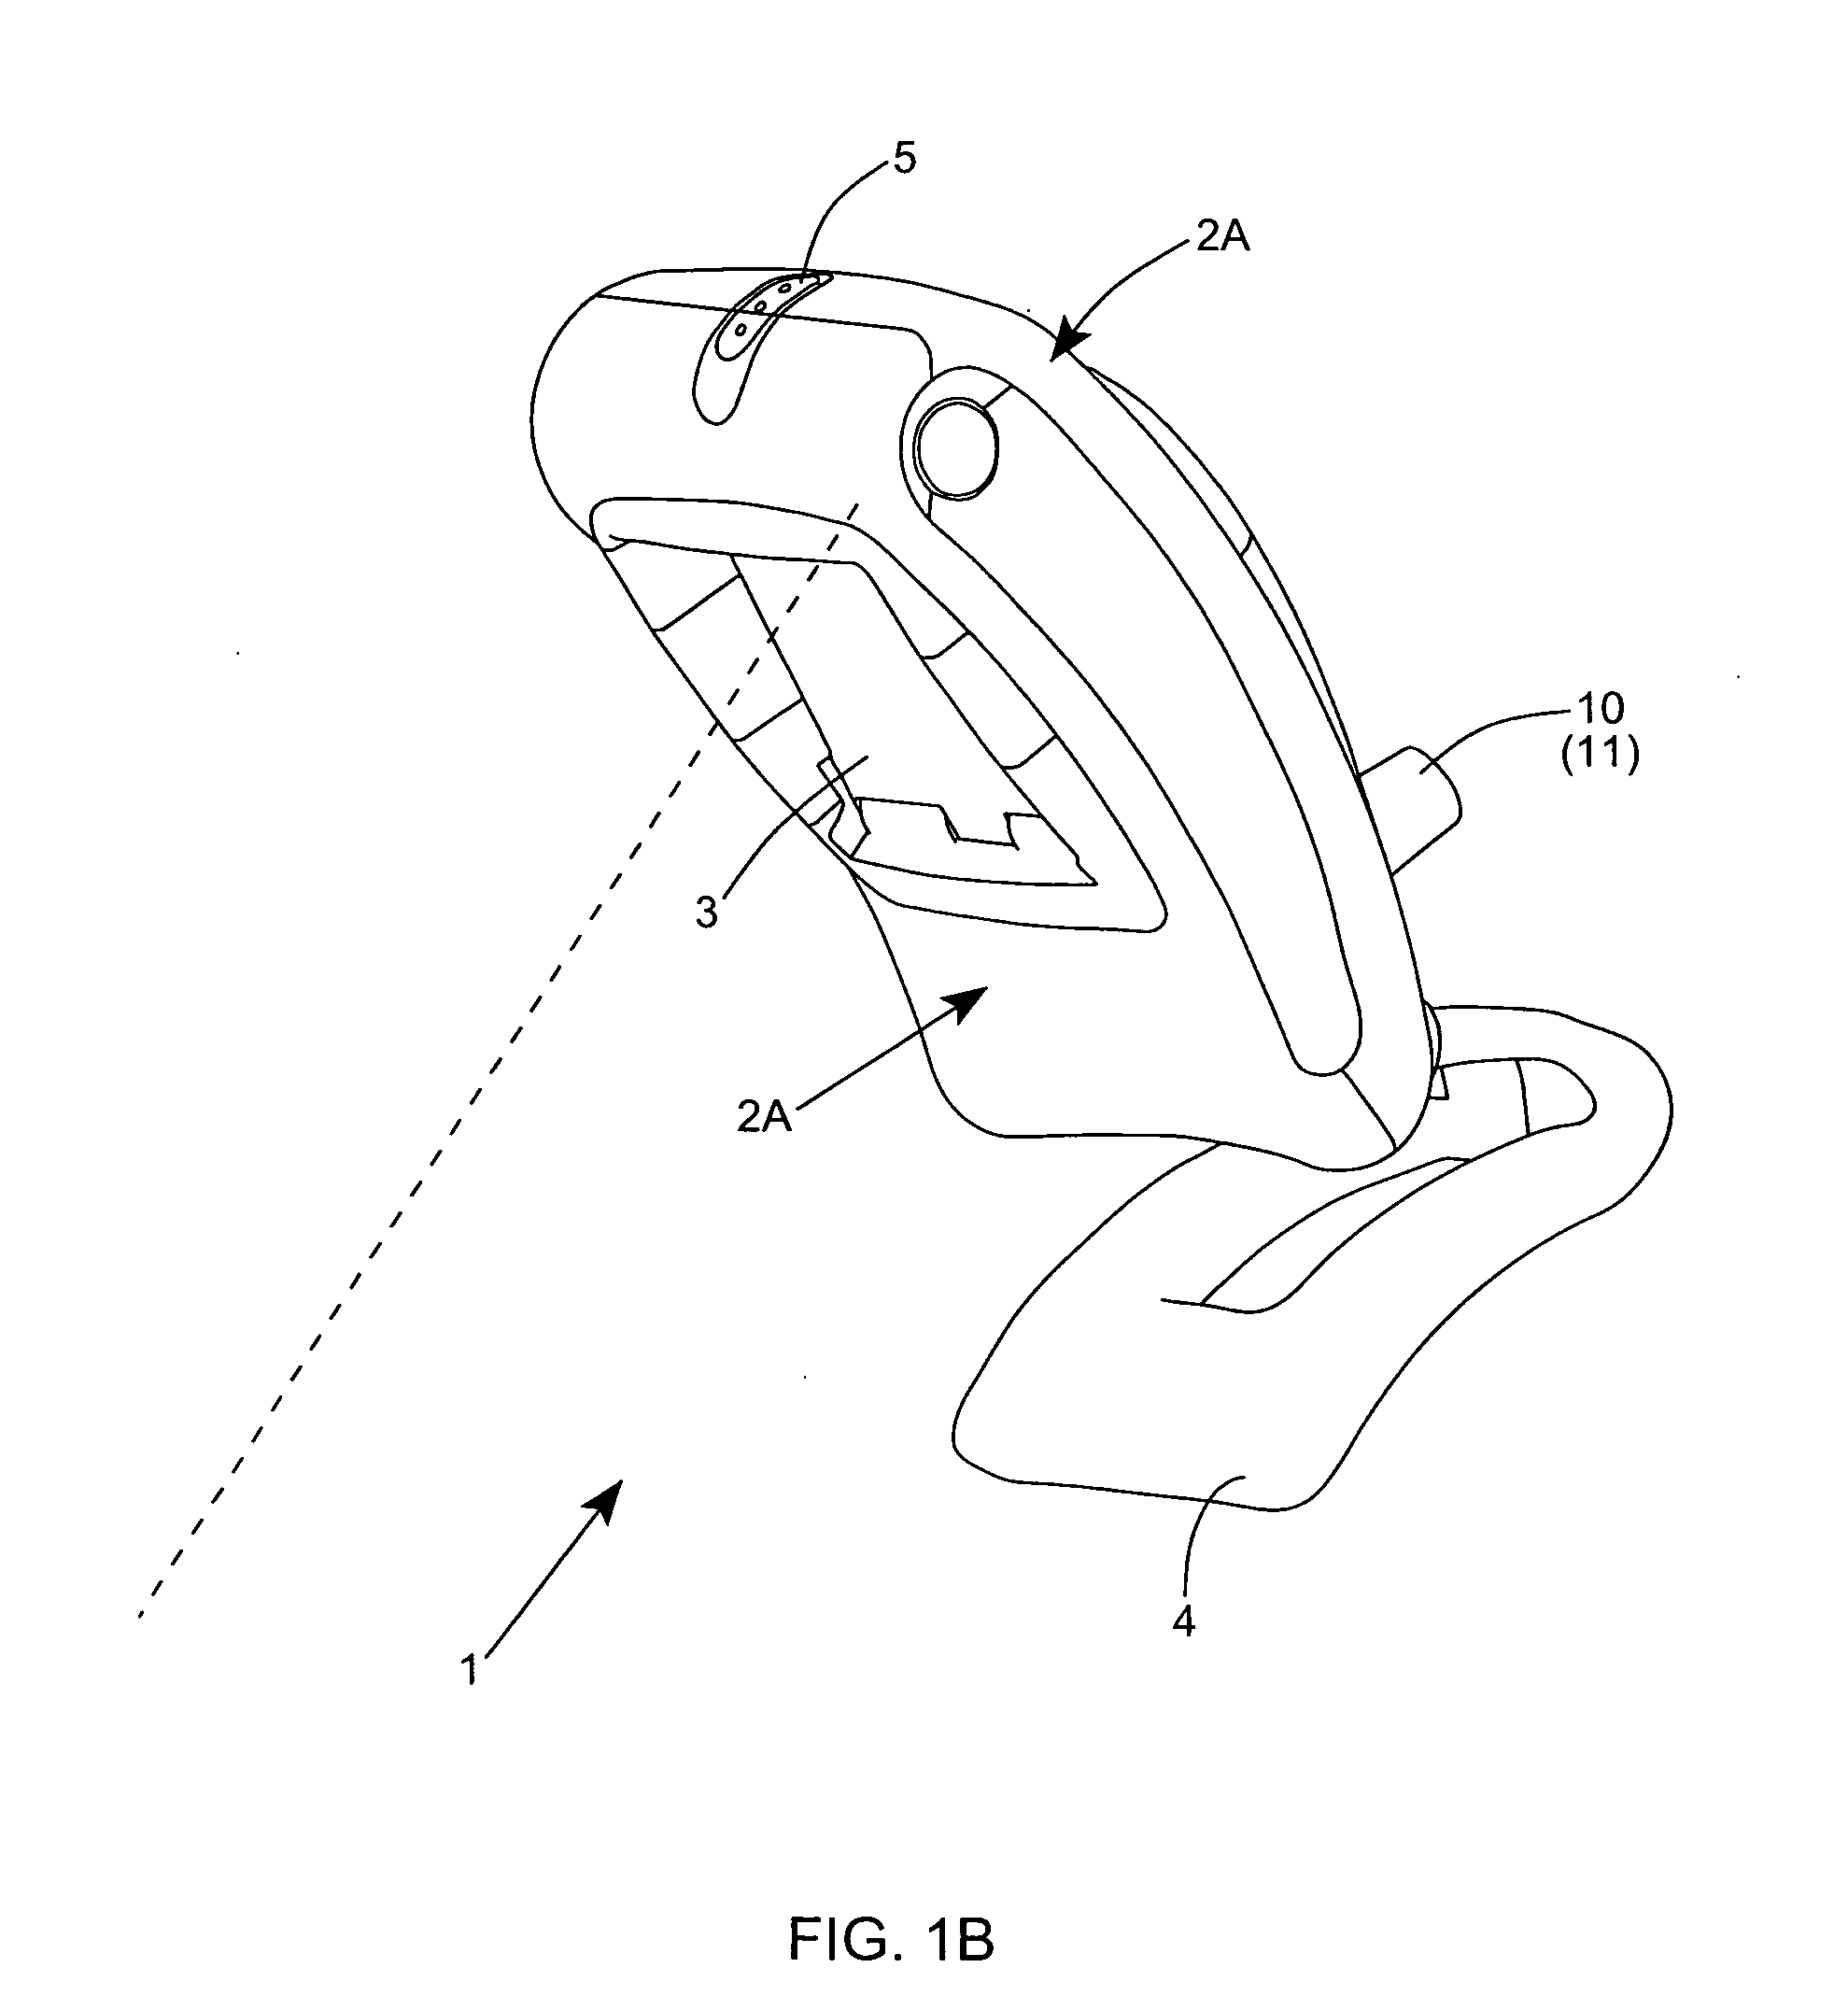 Digital image capture and processing system employing an image formation and detection system having an area-type image detection array supporting single snap-shot and periodic snap-shot modes of image acquisition during object illumination and imaging operations